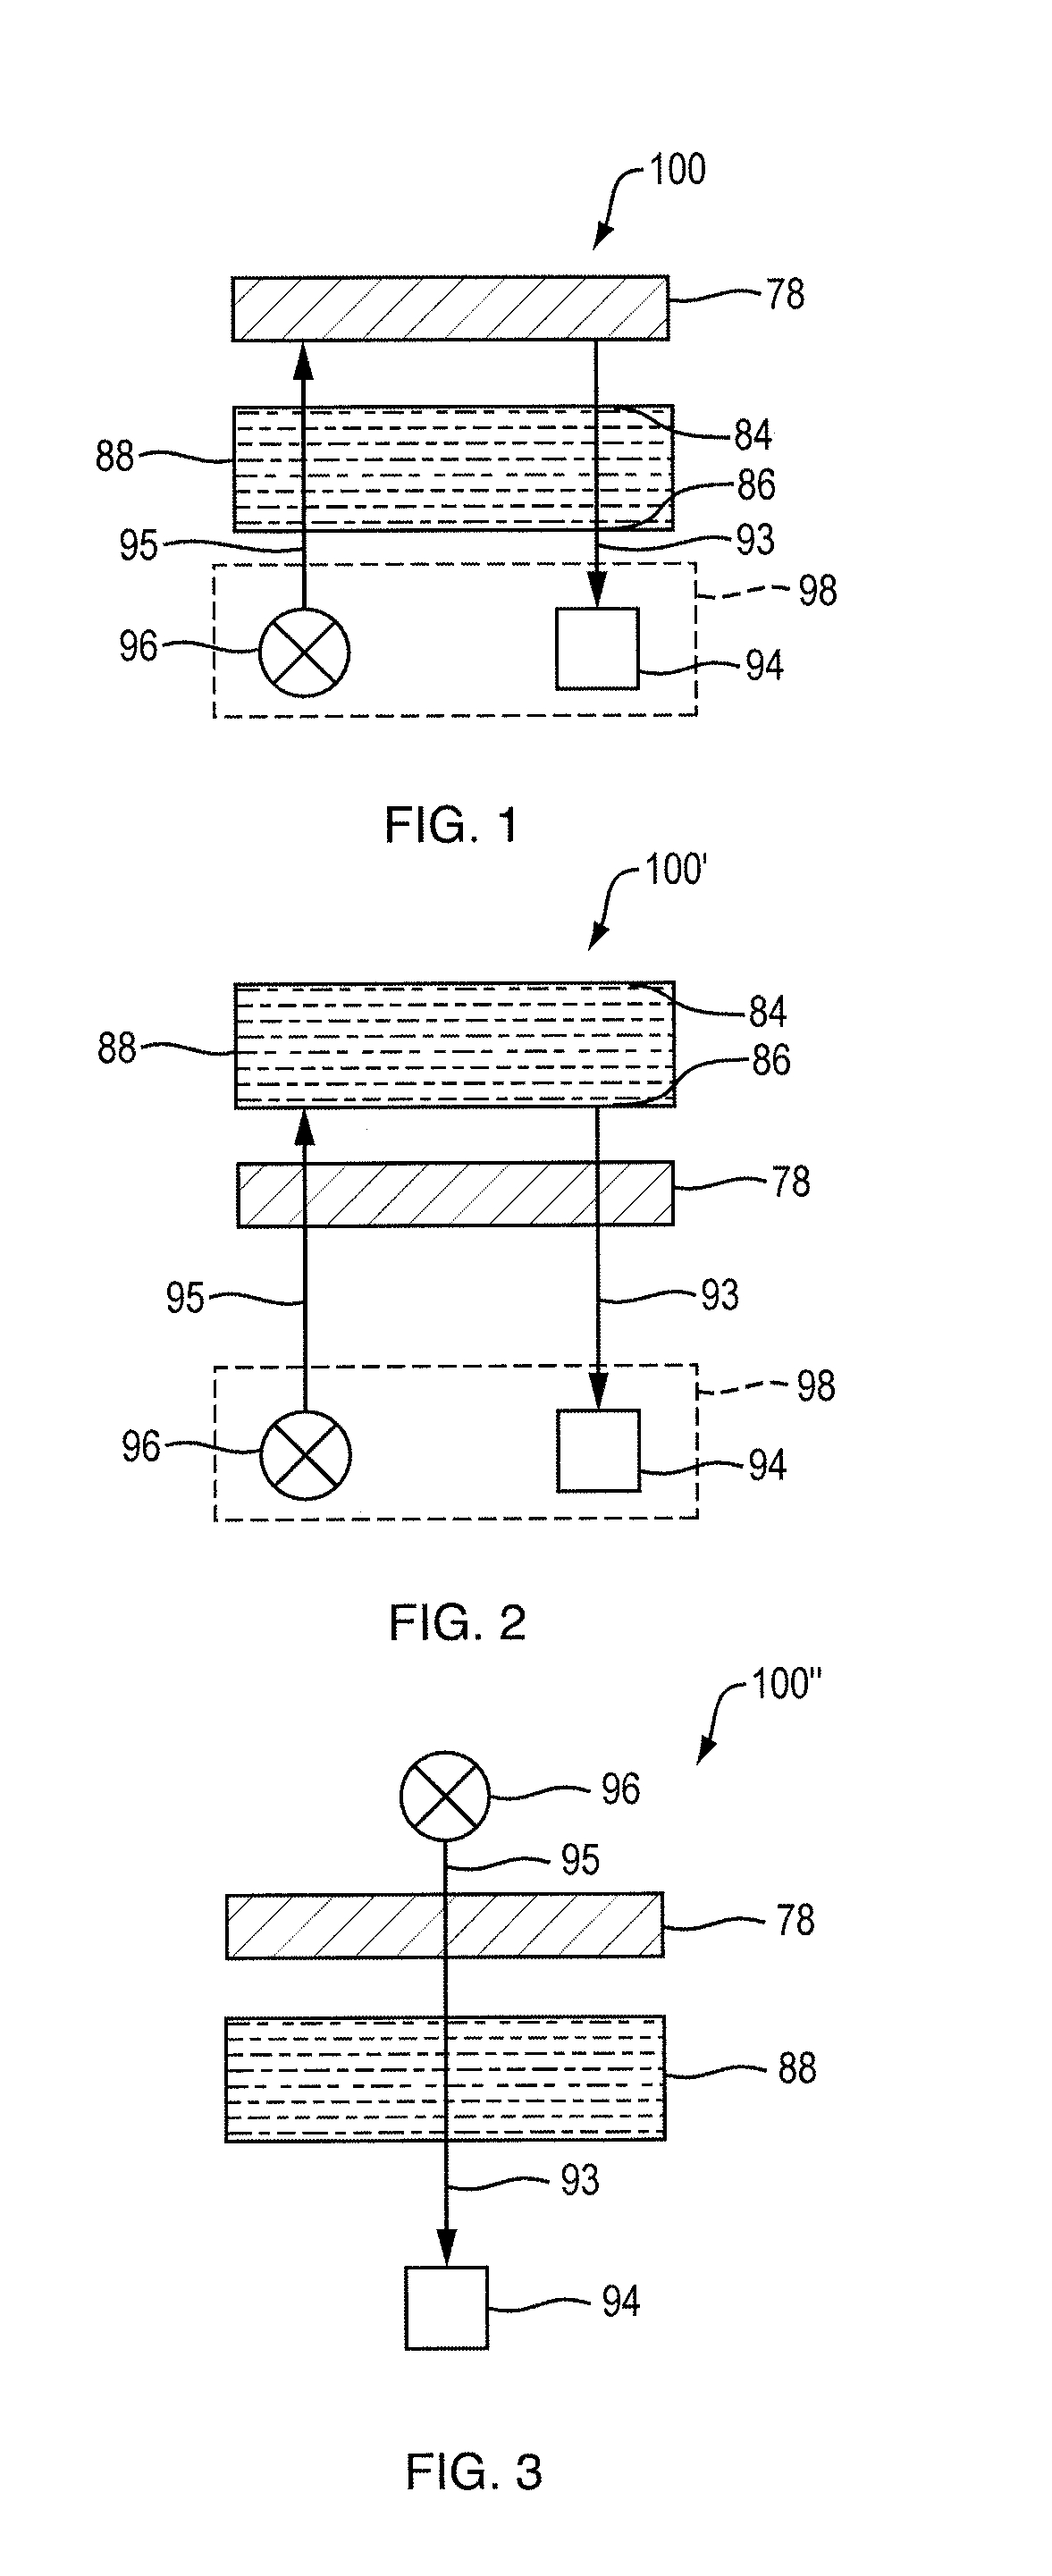 Methods and systems for point-of-care coagulation assays by optical detection